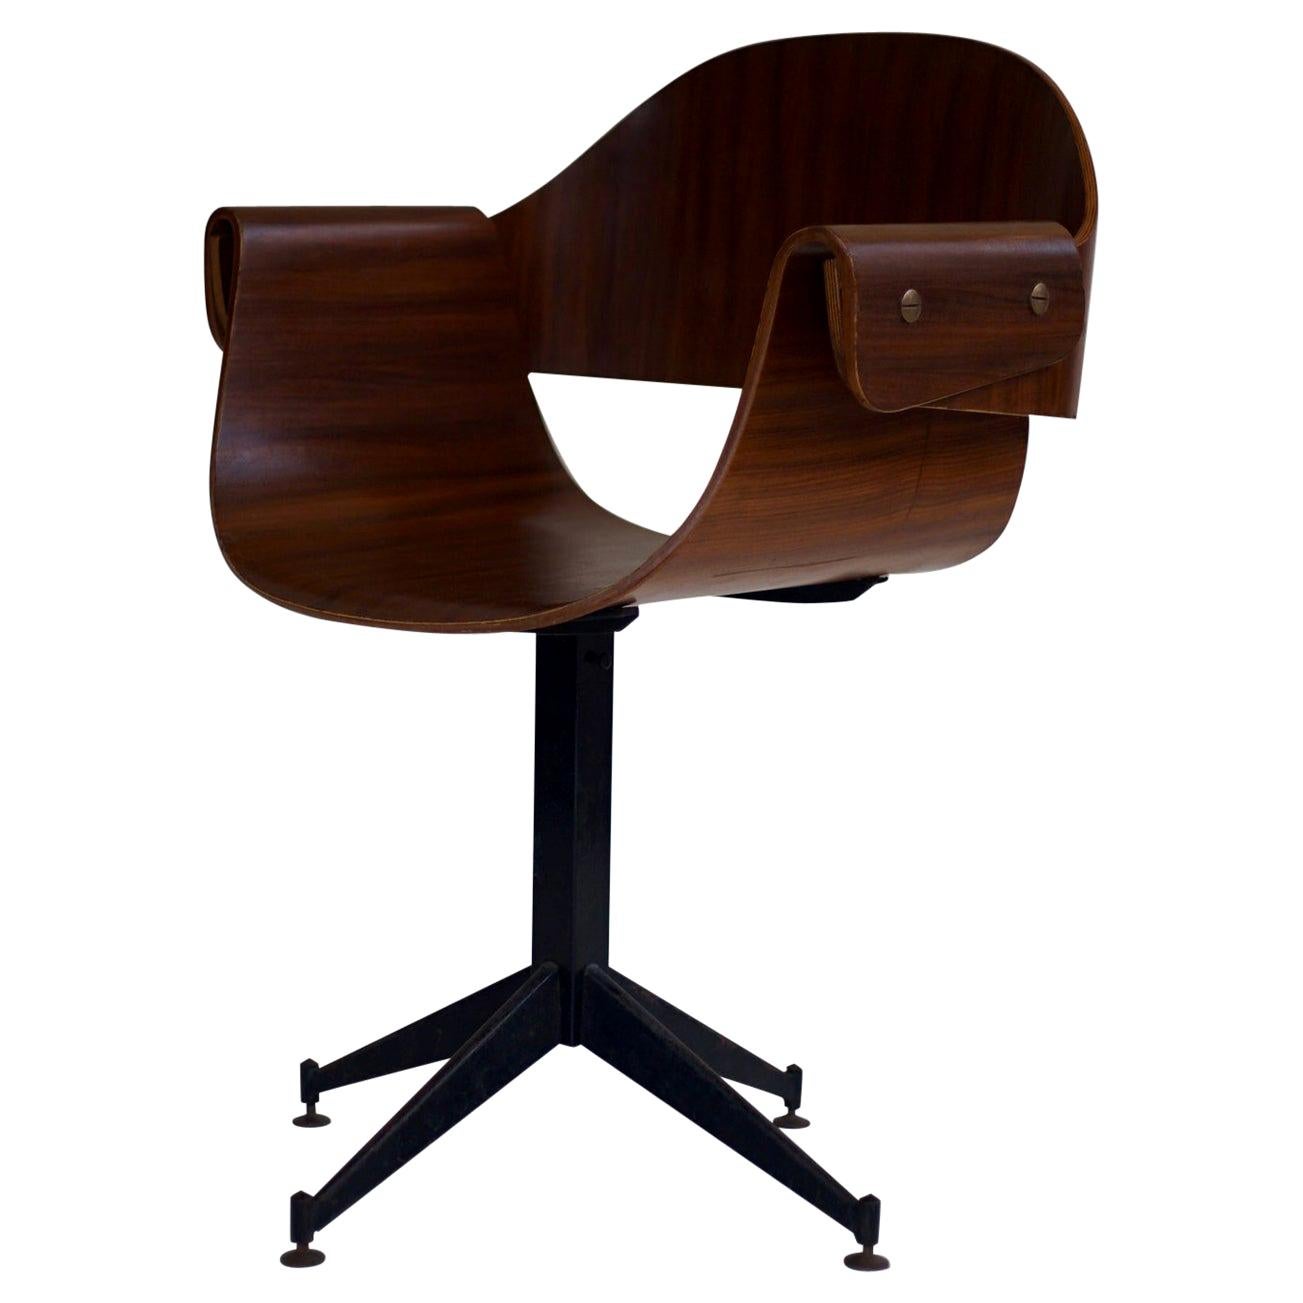 1950s Bent Ply Desk Chair by Carlo Ratti, Italy